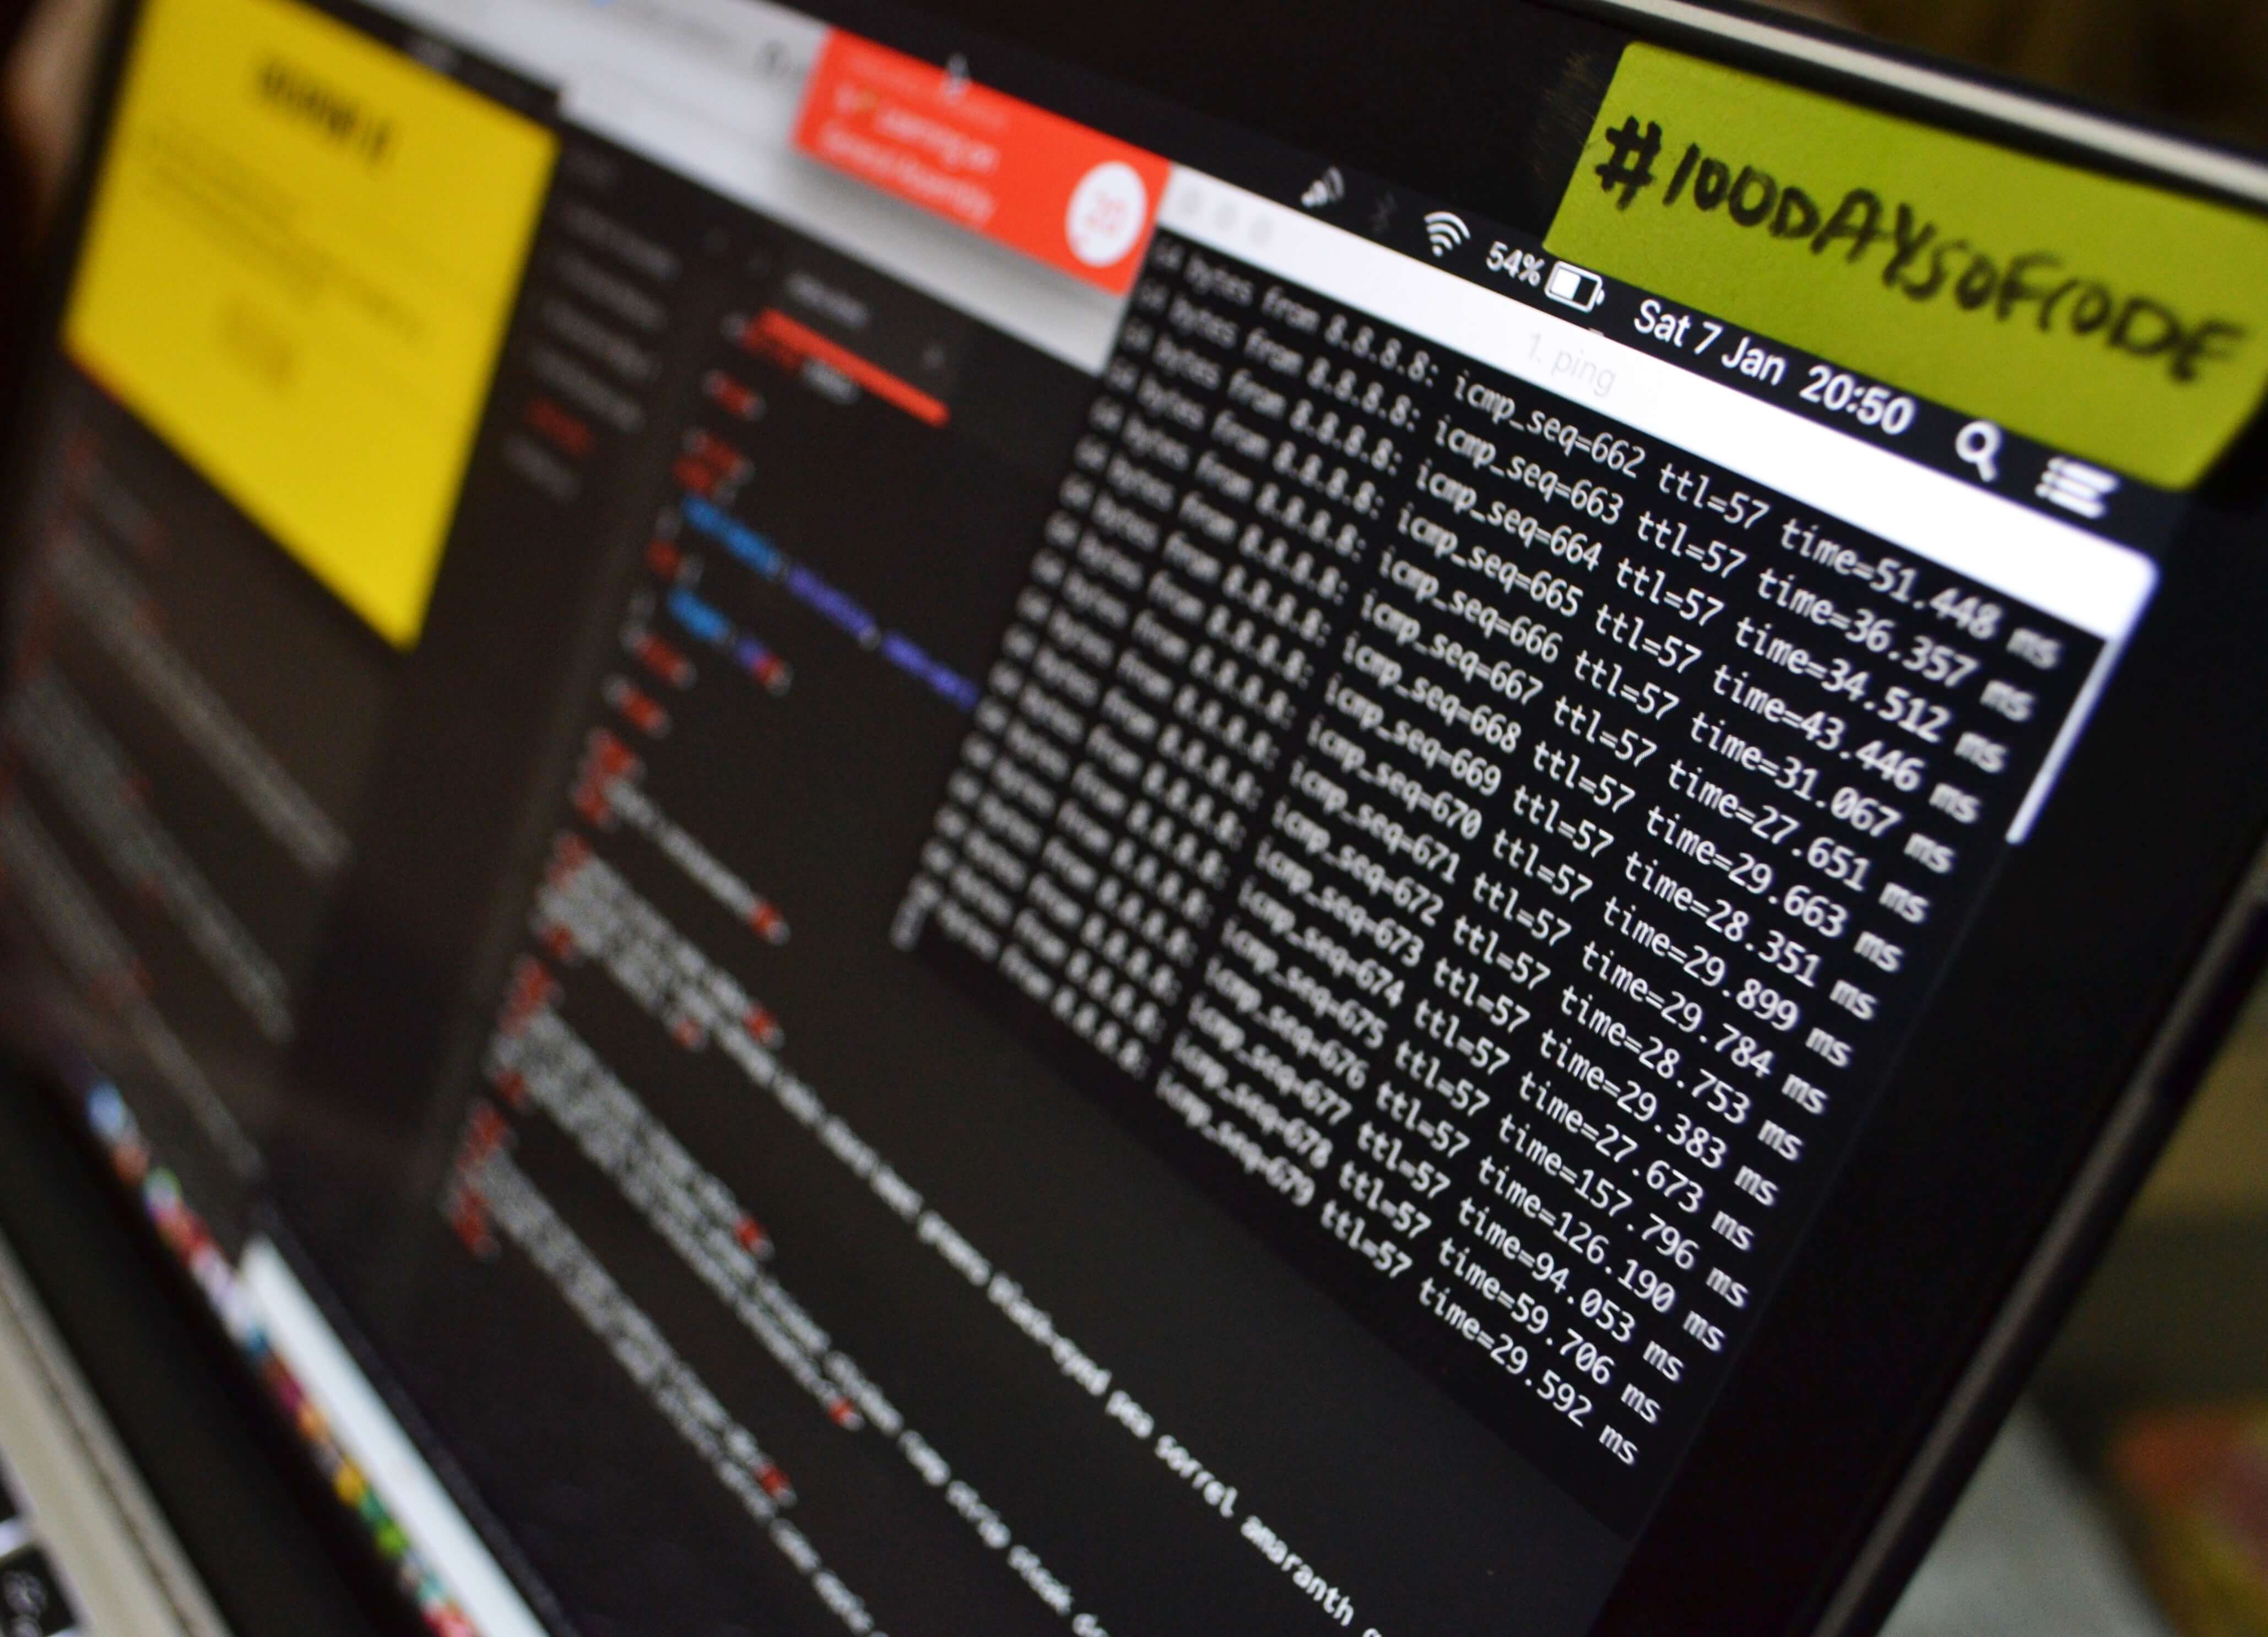 hashtag '100 Days of Code' sticker on computer screen  Photo by Lewis Ngugi on Unsplash